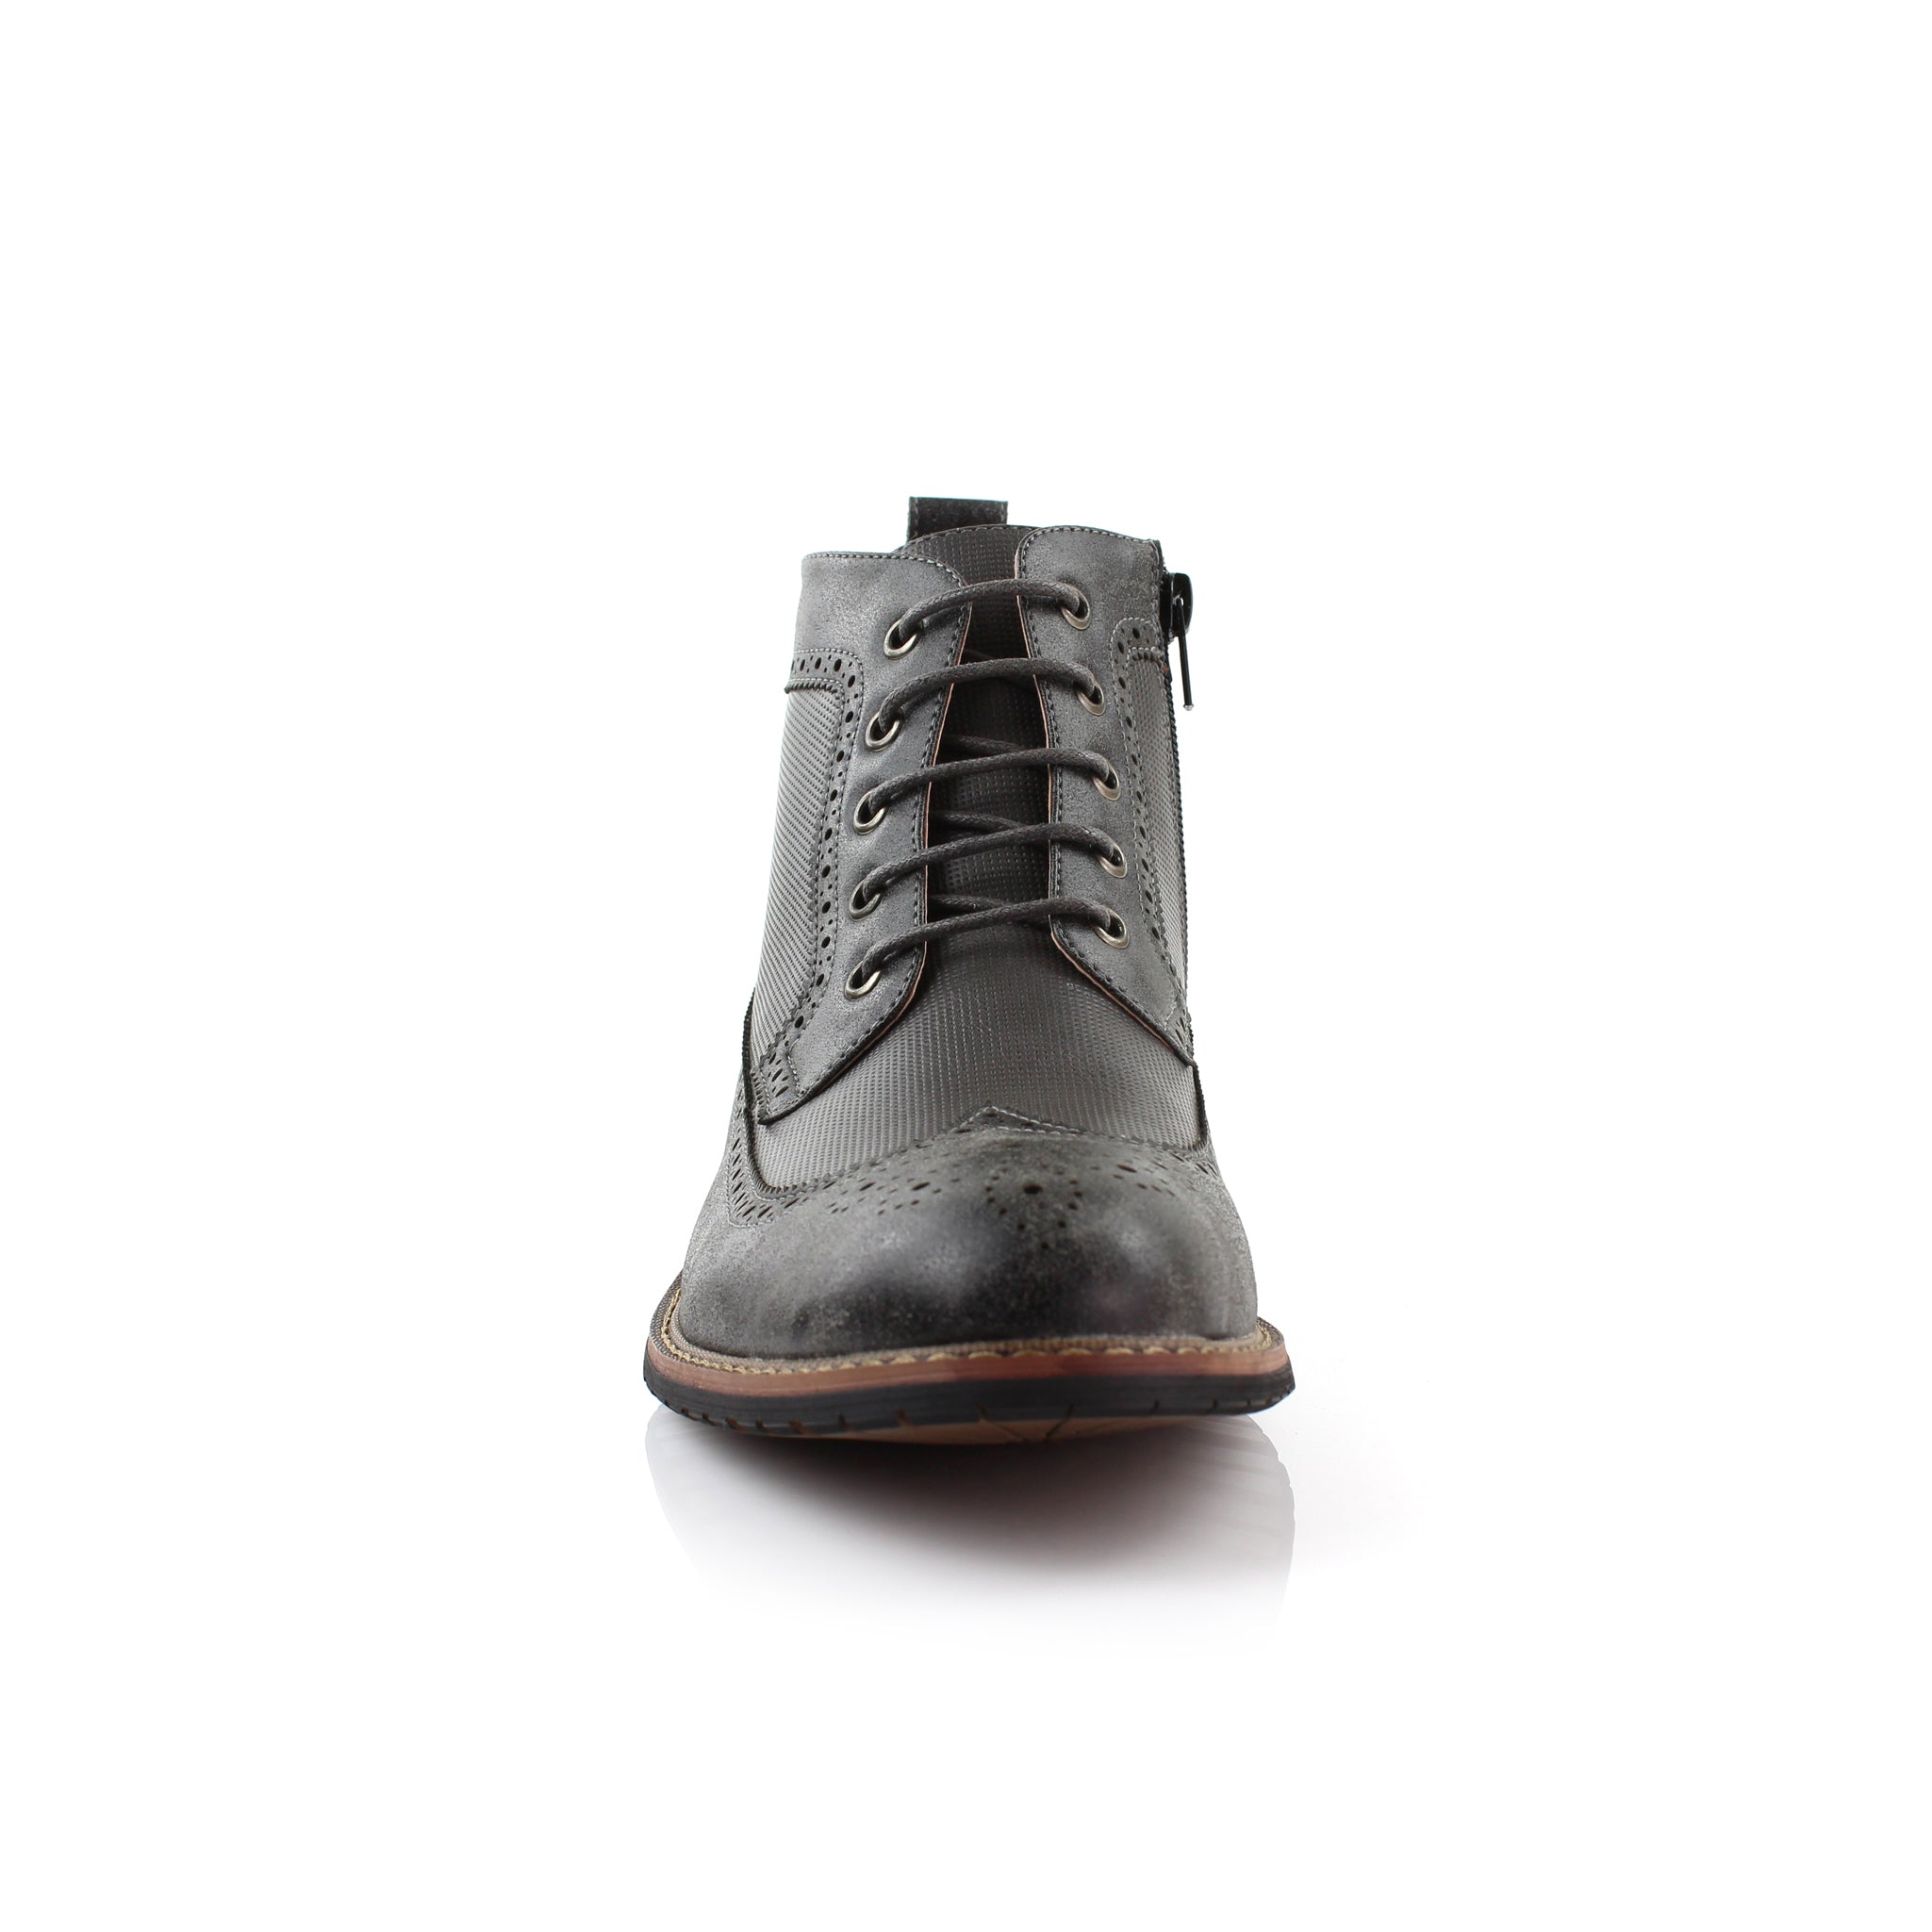 Burnished Brogue Wingtip Boots | Michael by Ferro Aldo | Conal Footwear | Front Angle View